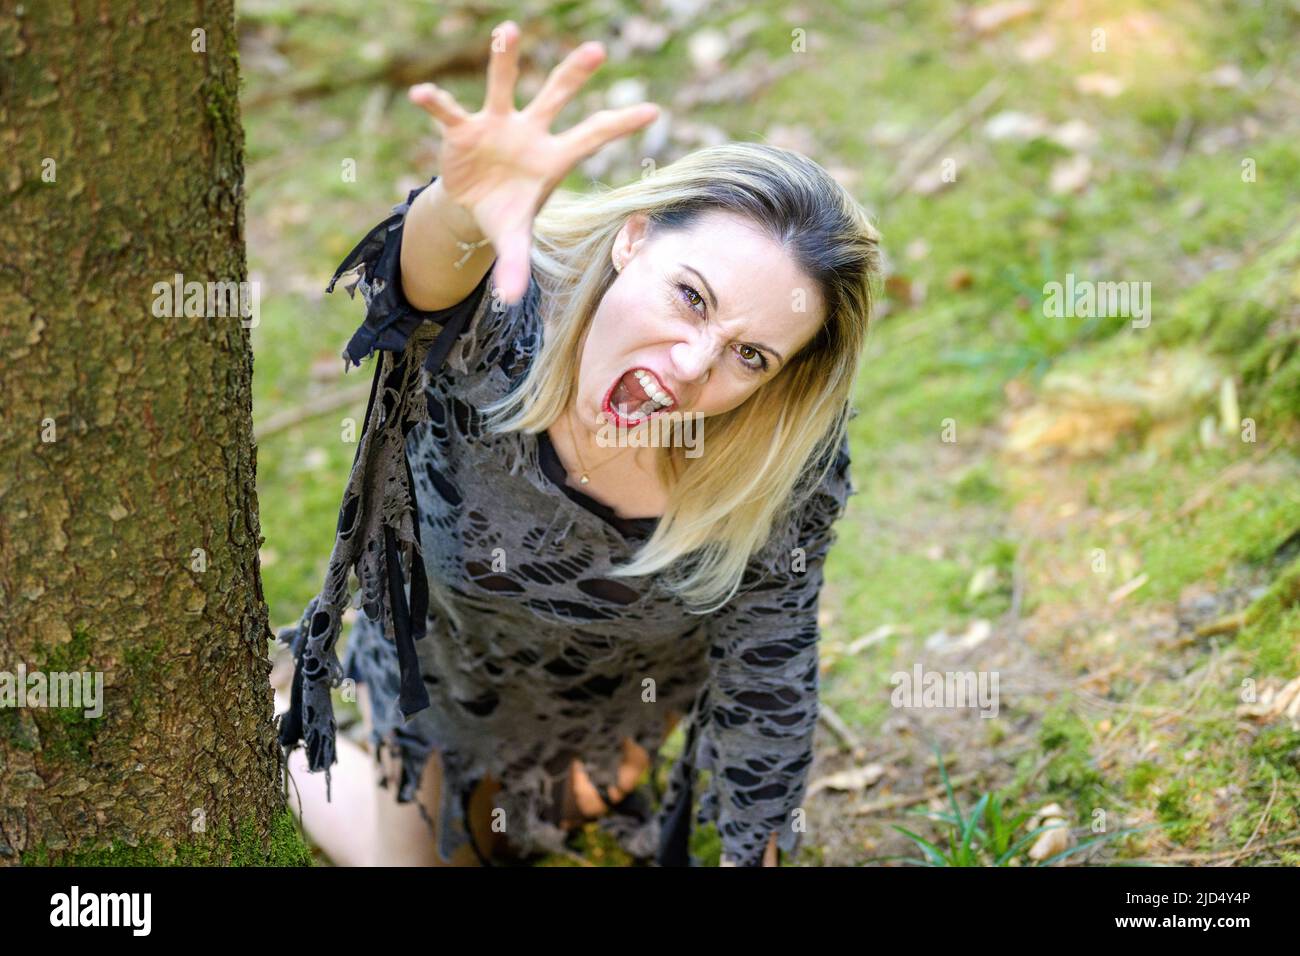 Snarling angry woman clawing at the camera in a forest reaching up with her hand as she crouches on the mossy ground Stock Photo